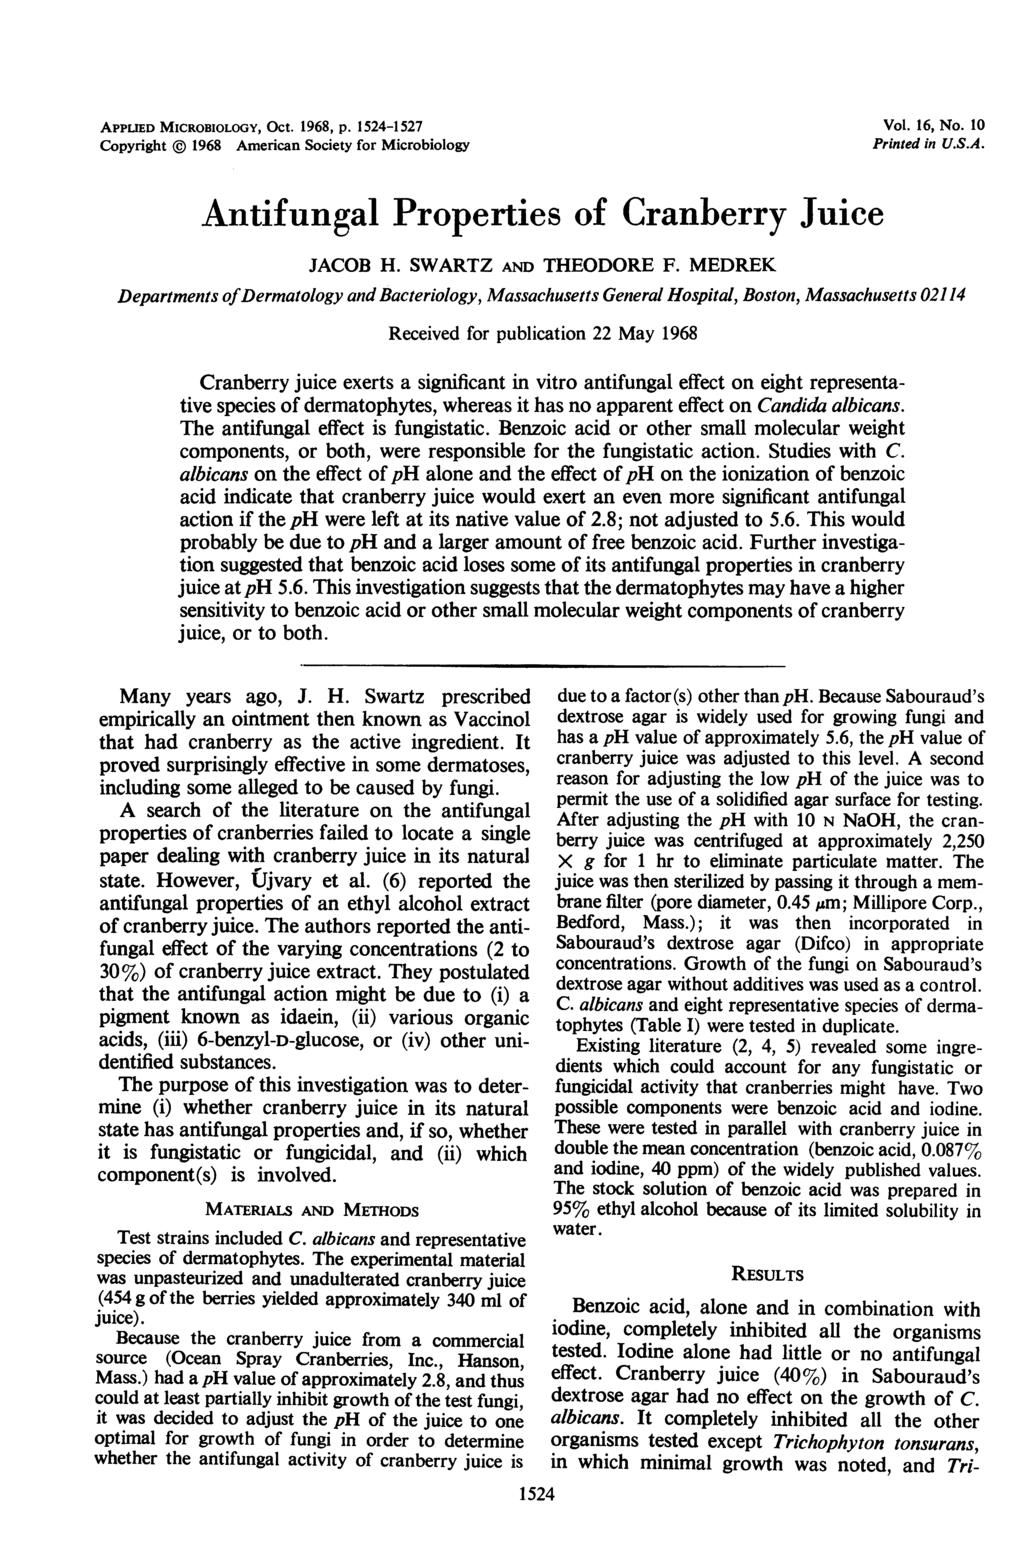 APPLIED MICROBIOLOGY, OCt. 1968, p. 1524-1527 Copyright @ 1968 American Society for Microbiology Vol. 16, No. 10 Printed in U.S.A. Antifungal Properties of Cranberry Juice JACOB H.